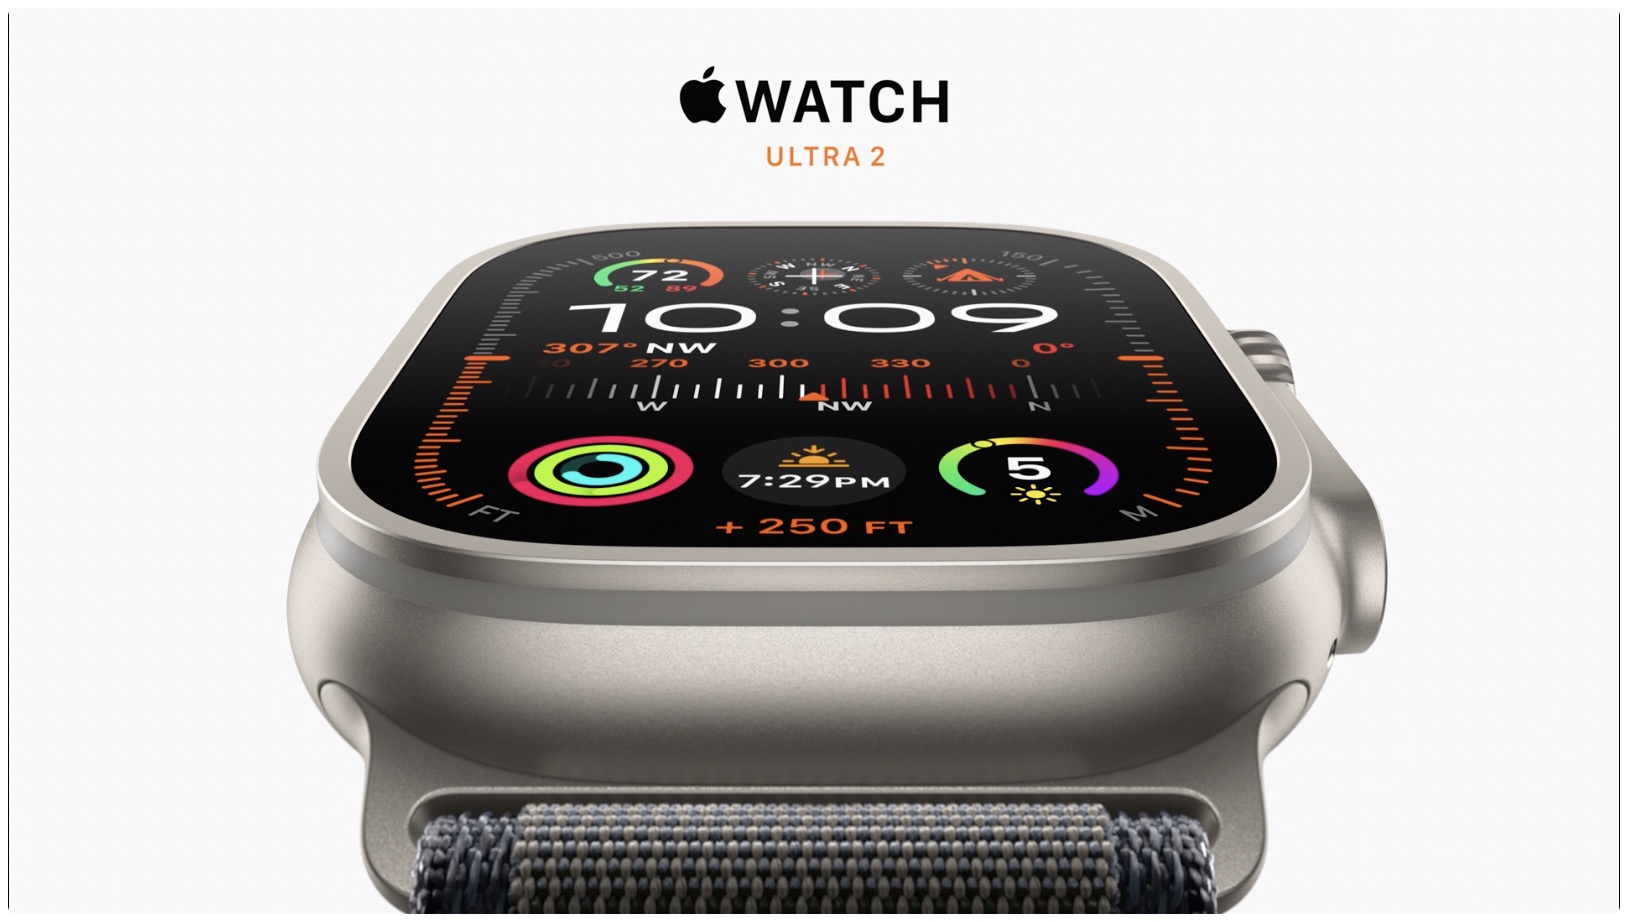 A quick fix for the Apple Watch display flickering issue